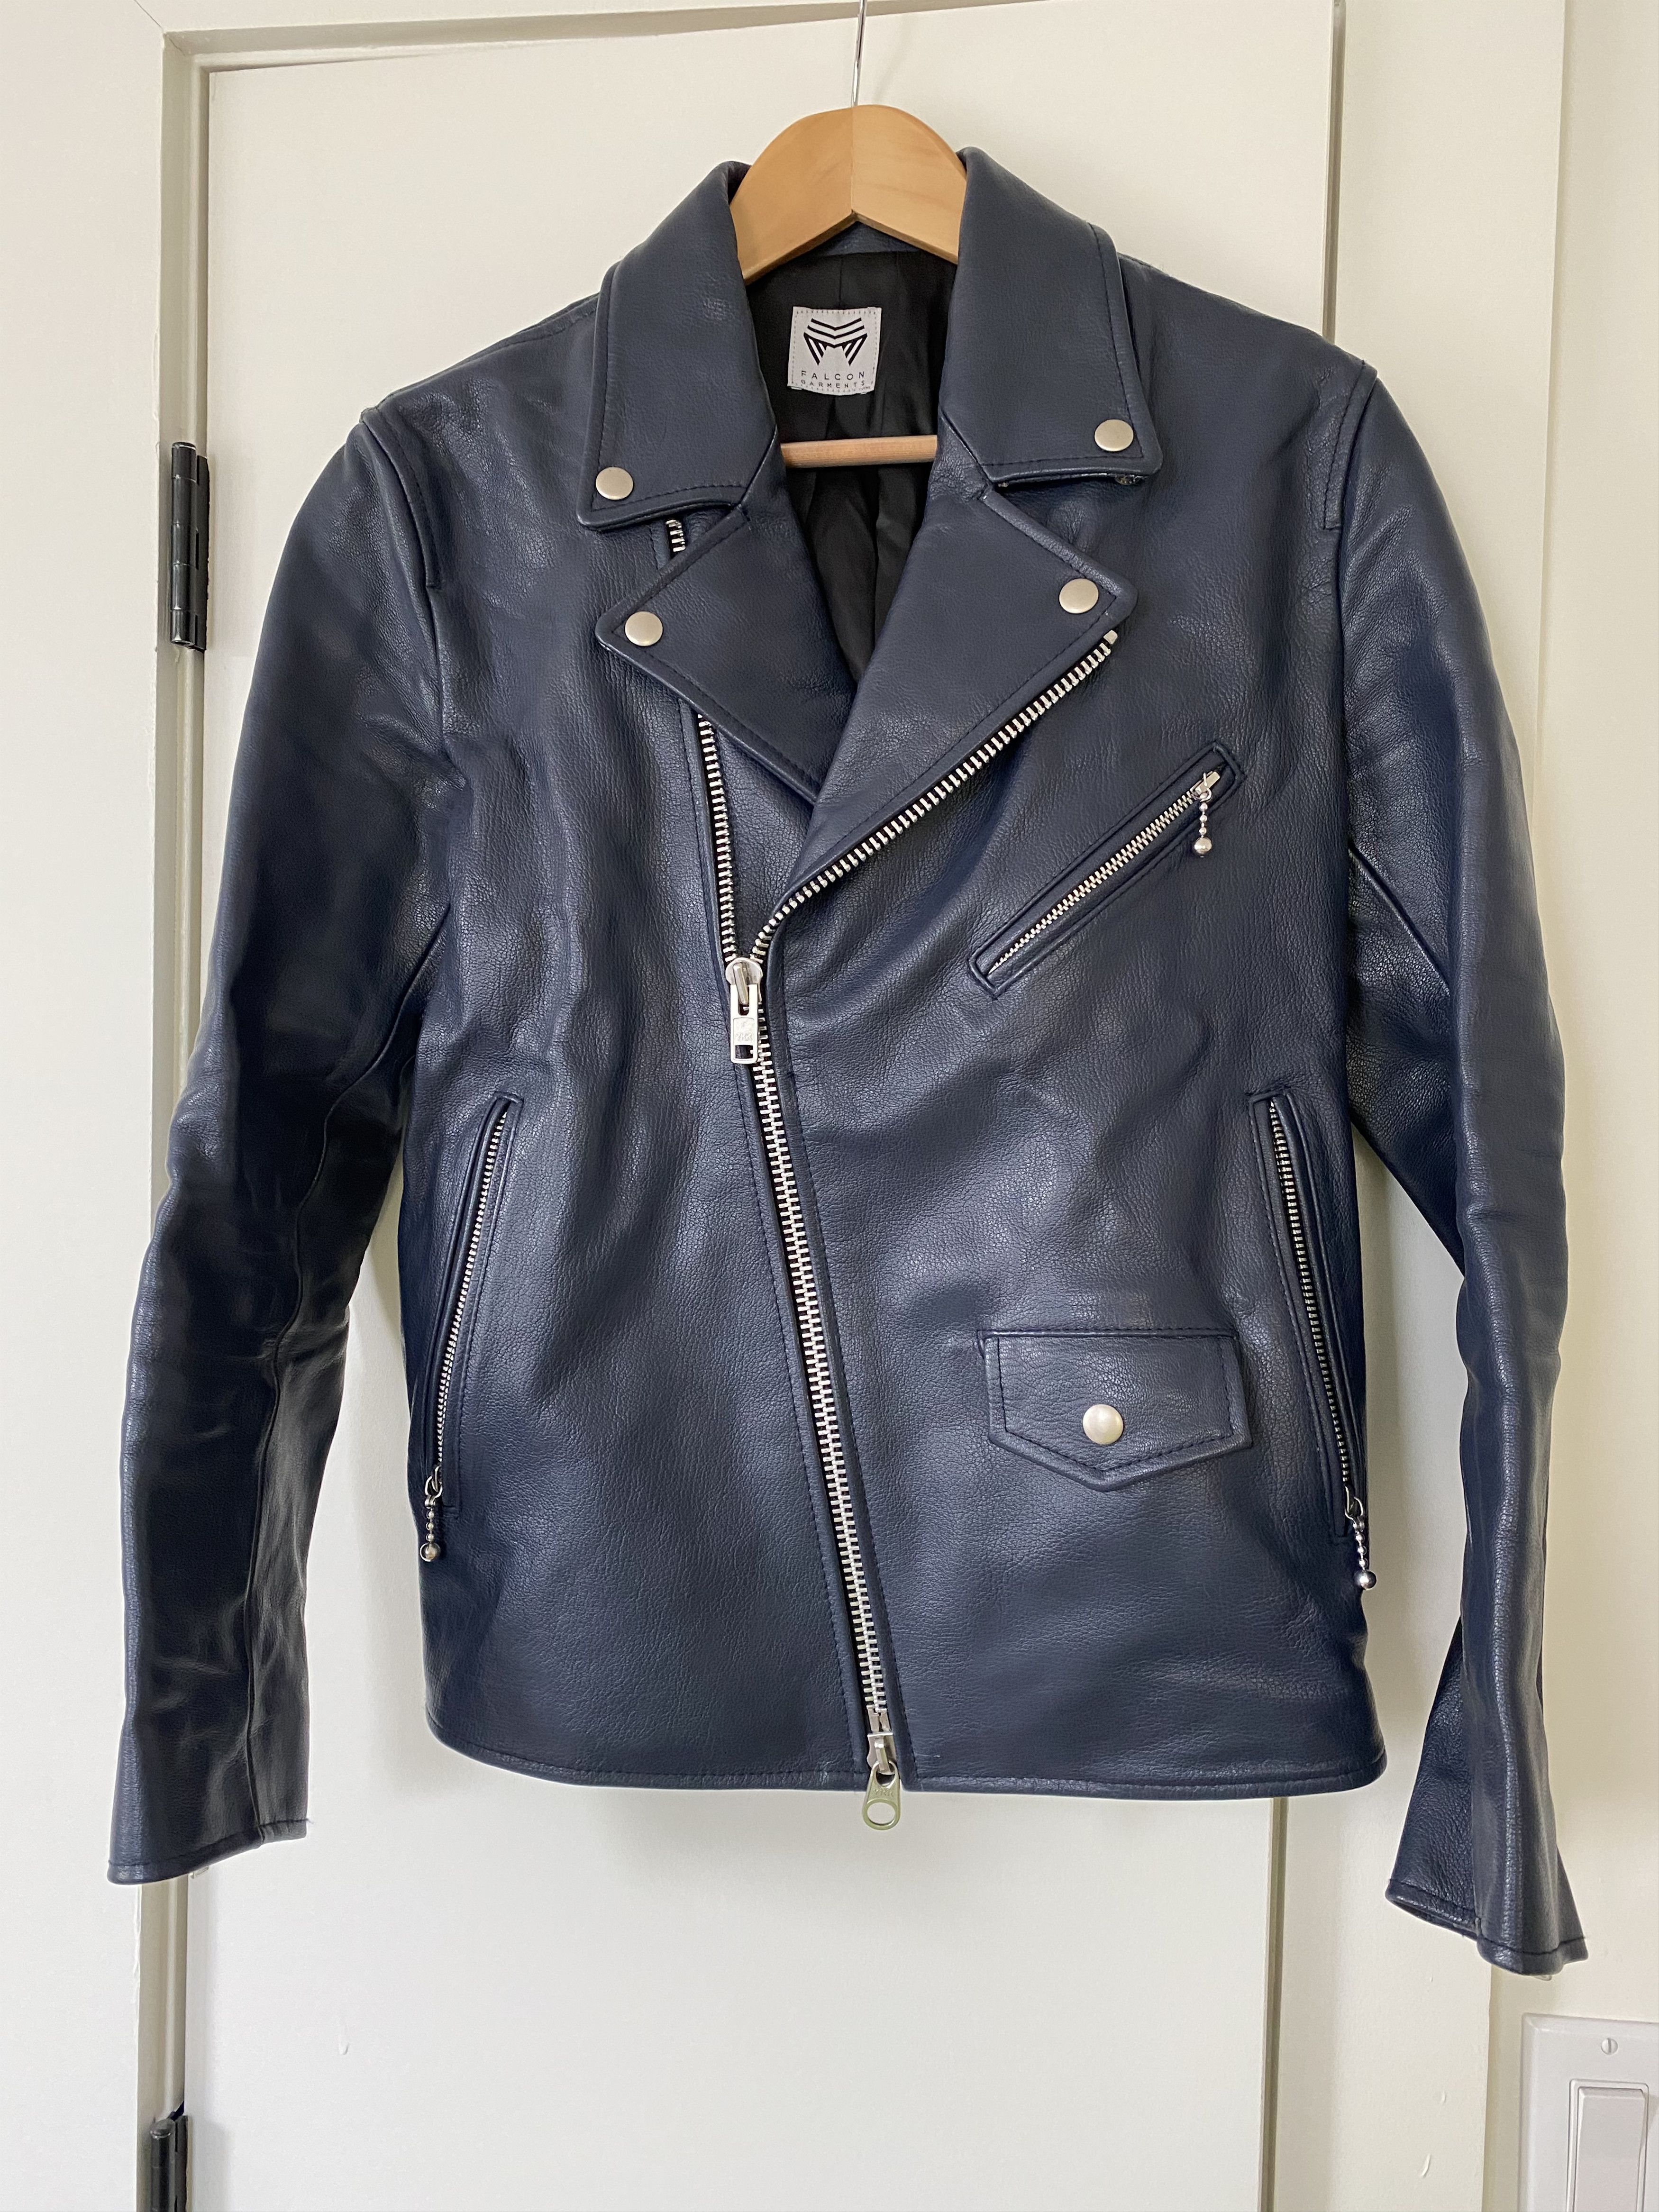 Temple Of Jawnz Double Rider Leather Jacket DR3 Navy Goatskin - Stock 45 Size US S / EU 44-46 / 1 - 1 Preview